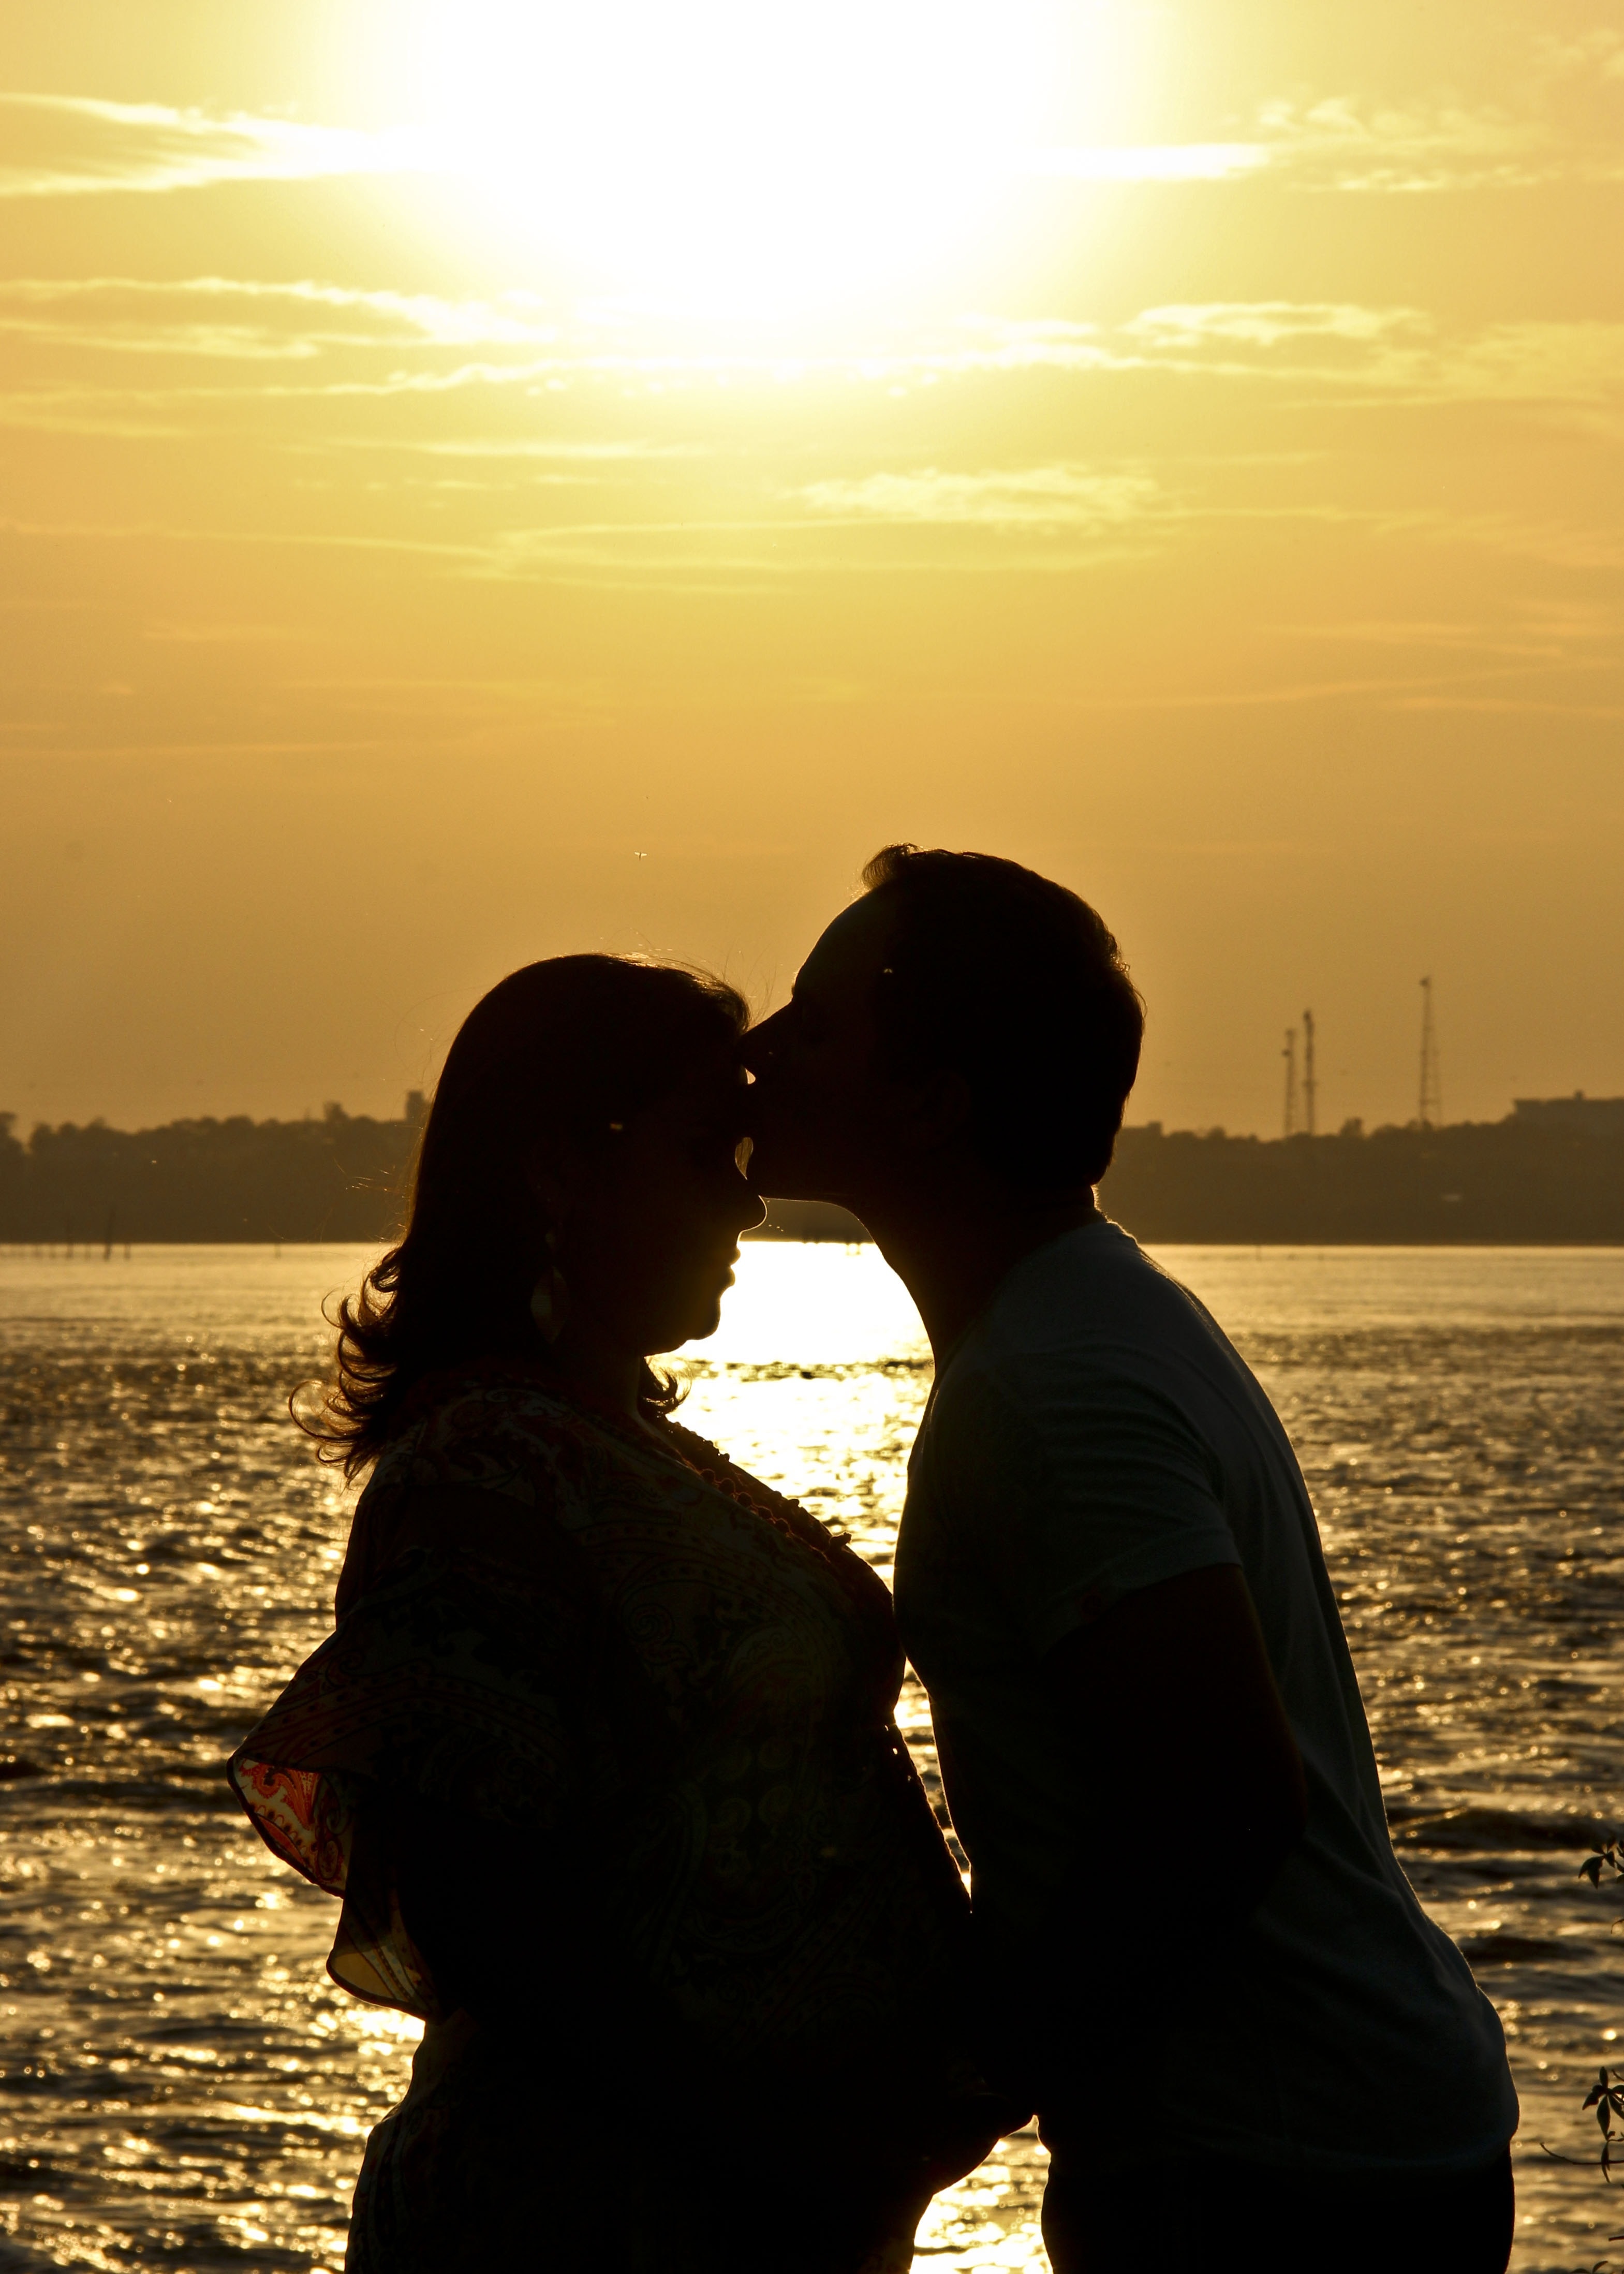 silhouette of man kissing woman near body of water during sunset